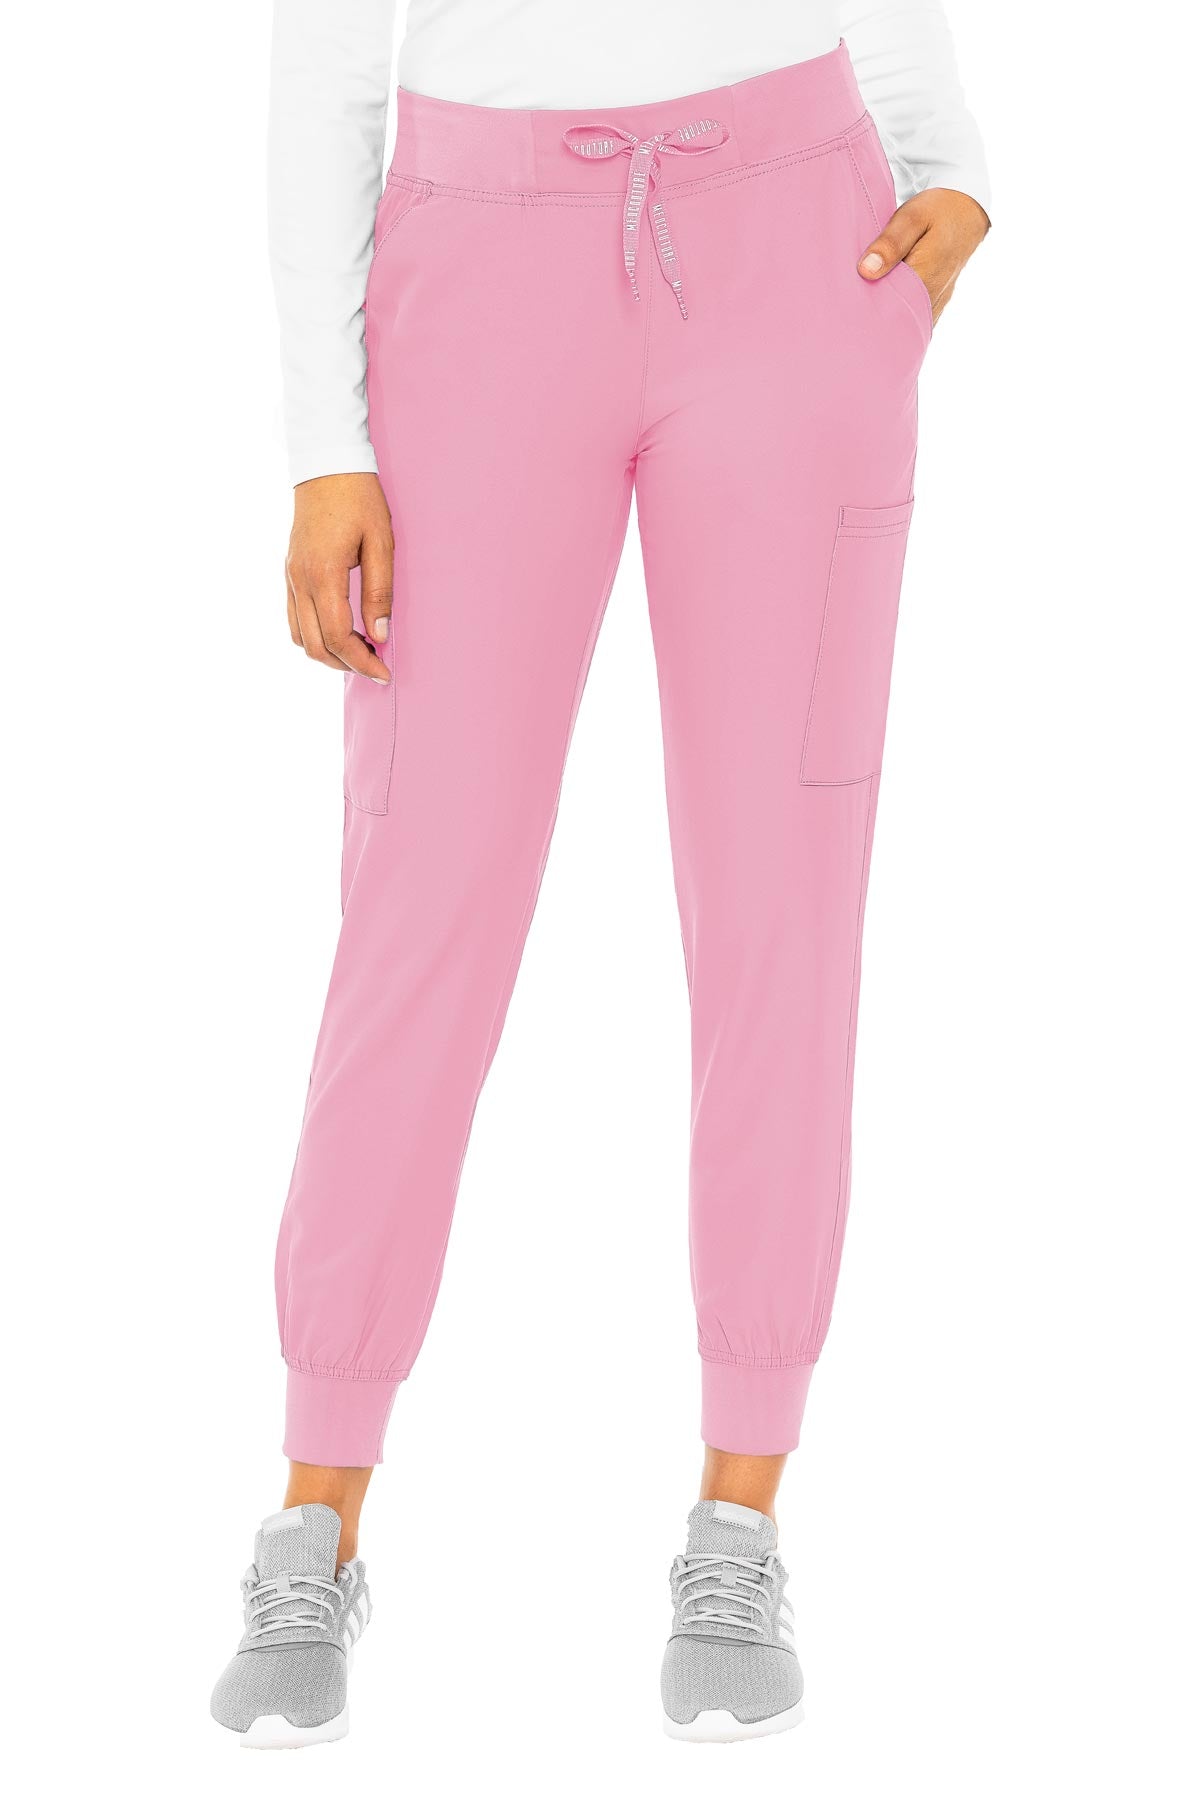 Med Couture Taffy Pink PANT